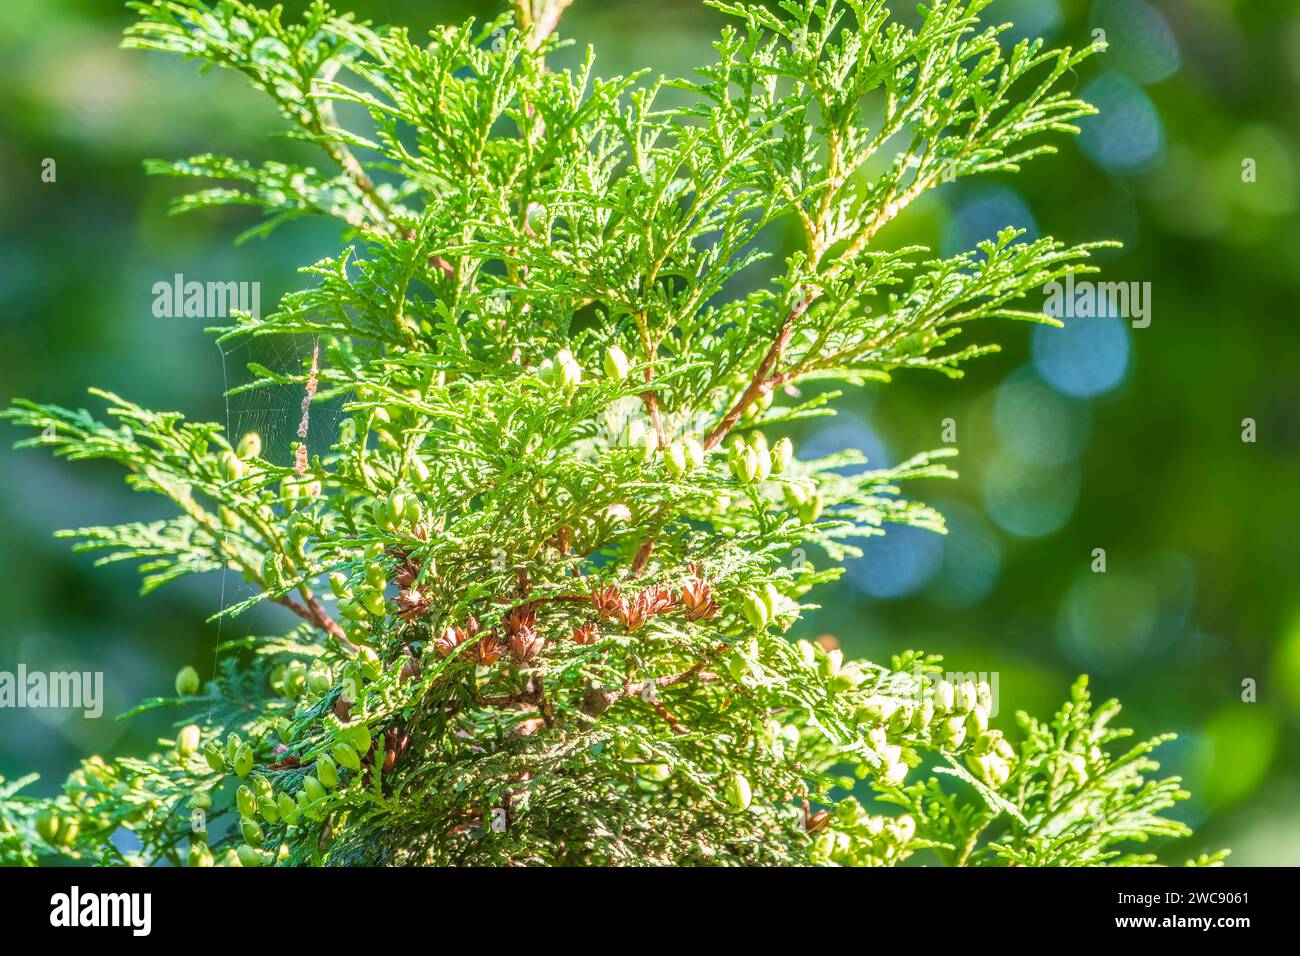 Thuja occidentalis green foliage. Green thuja tree branches, background. Thuja occidentalis, or eastern arborvitae close-up. texture background. Stock Photo